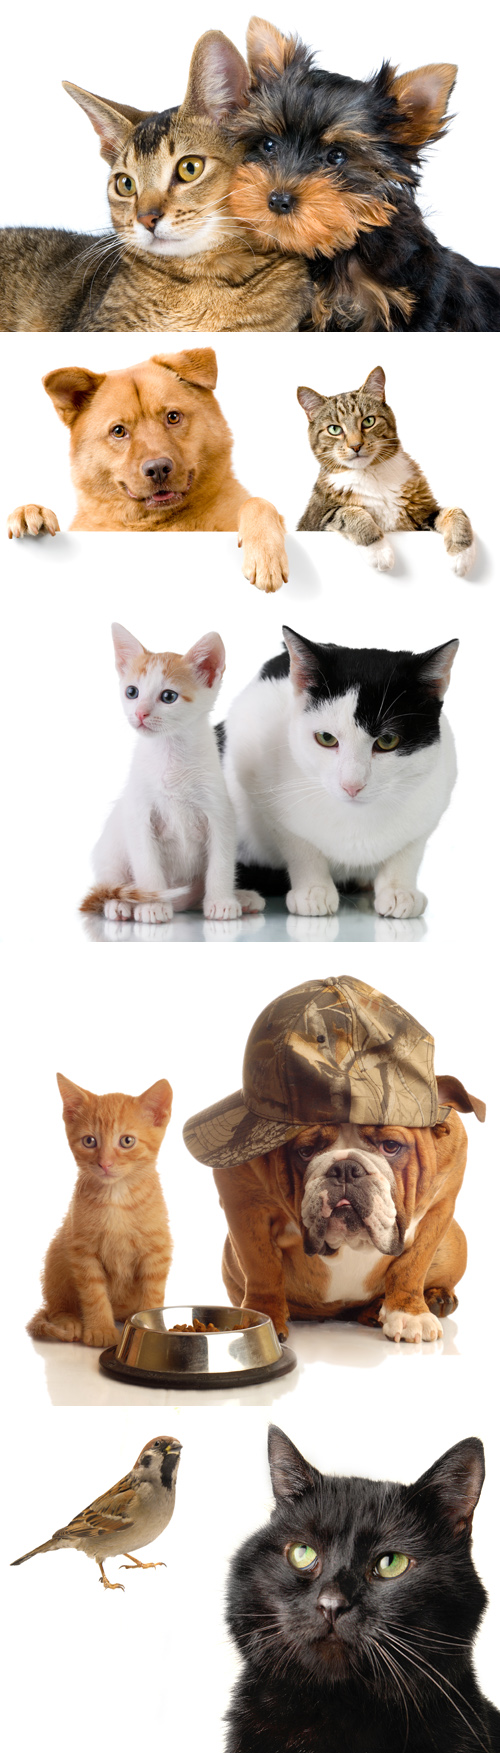 Stock Photos - Cats and Dogs